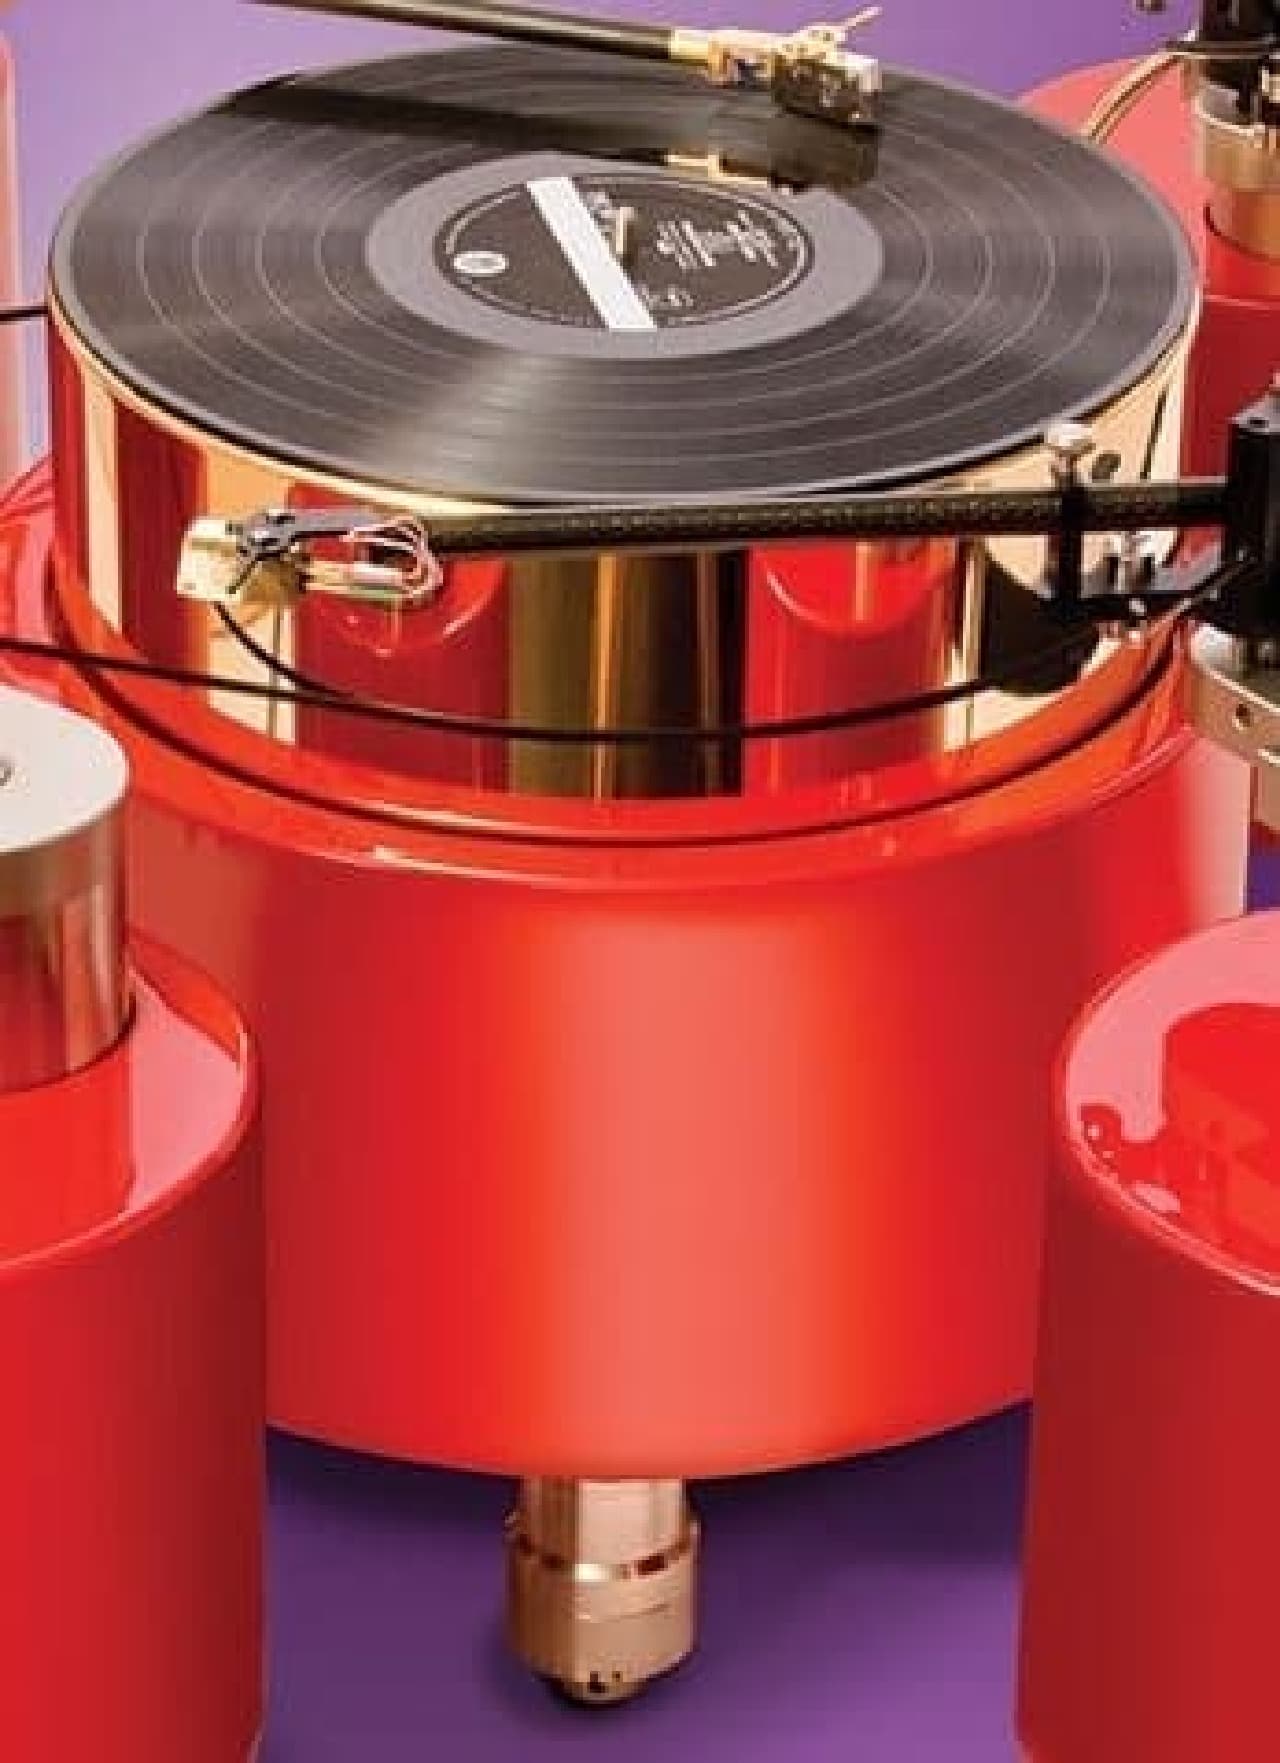 A turntable is installed on the large cylinder in the center